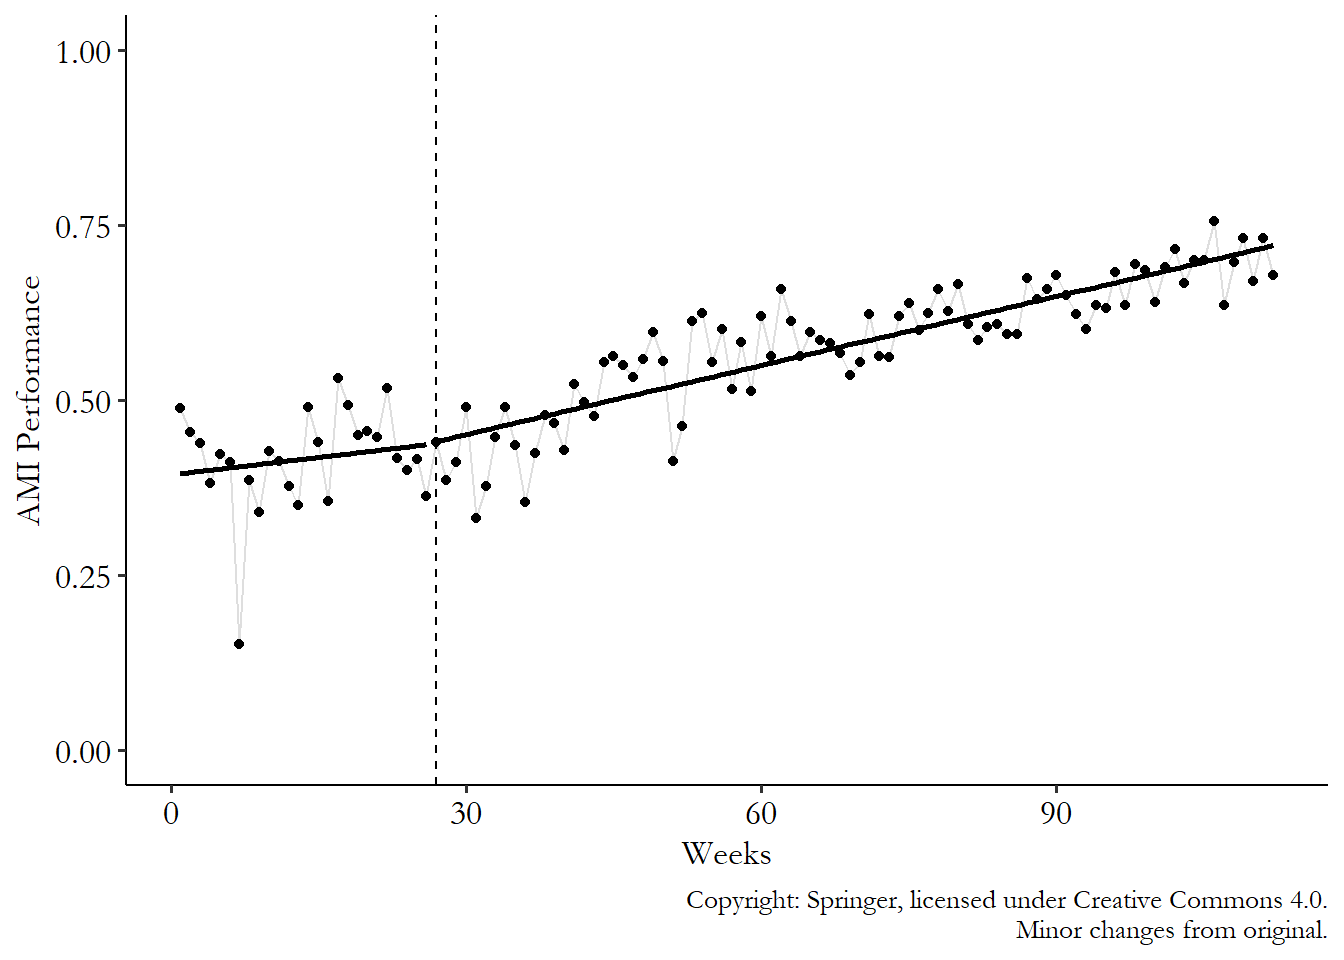 Graph showing the performance of ambulances in the time periods leading up to a policy change in how cooperative the system is, with a linear regression fit on either side of the cutoff date